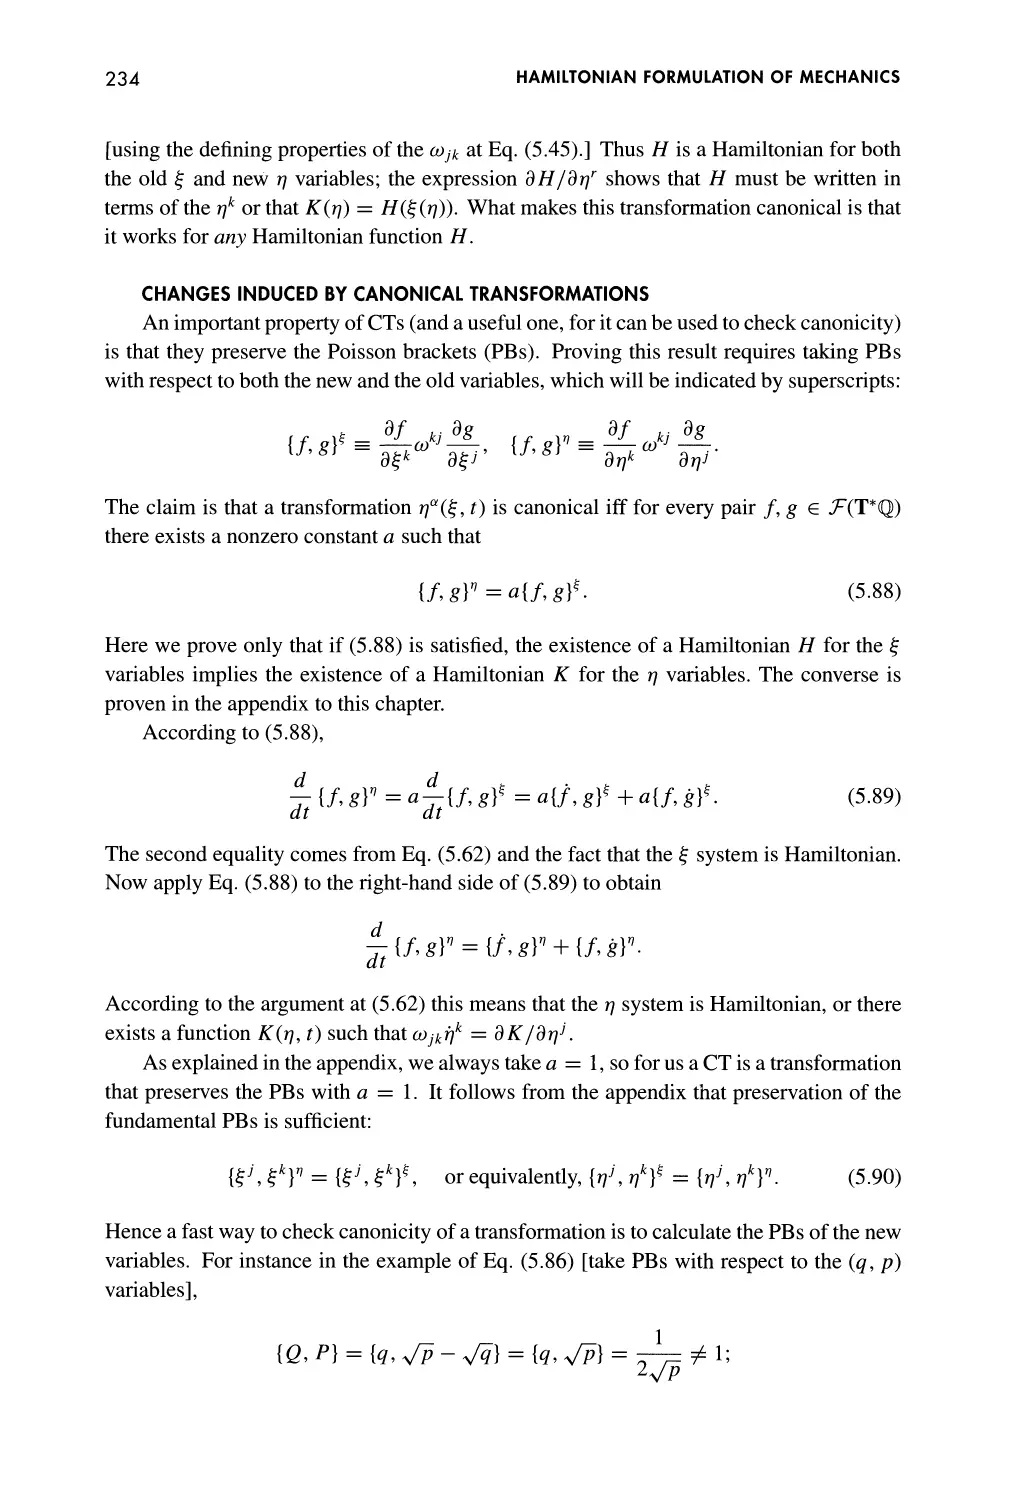 Changes Induced by Canonical Transformations